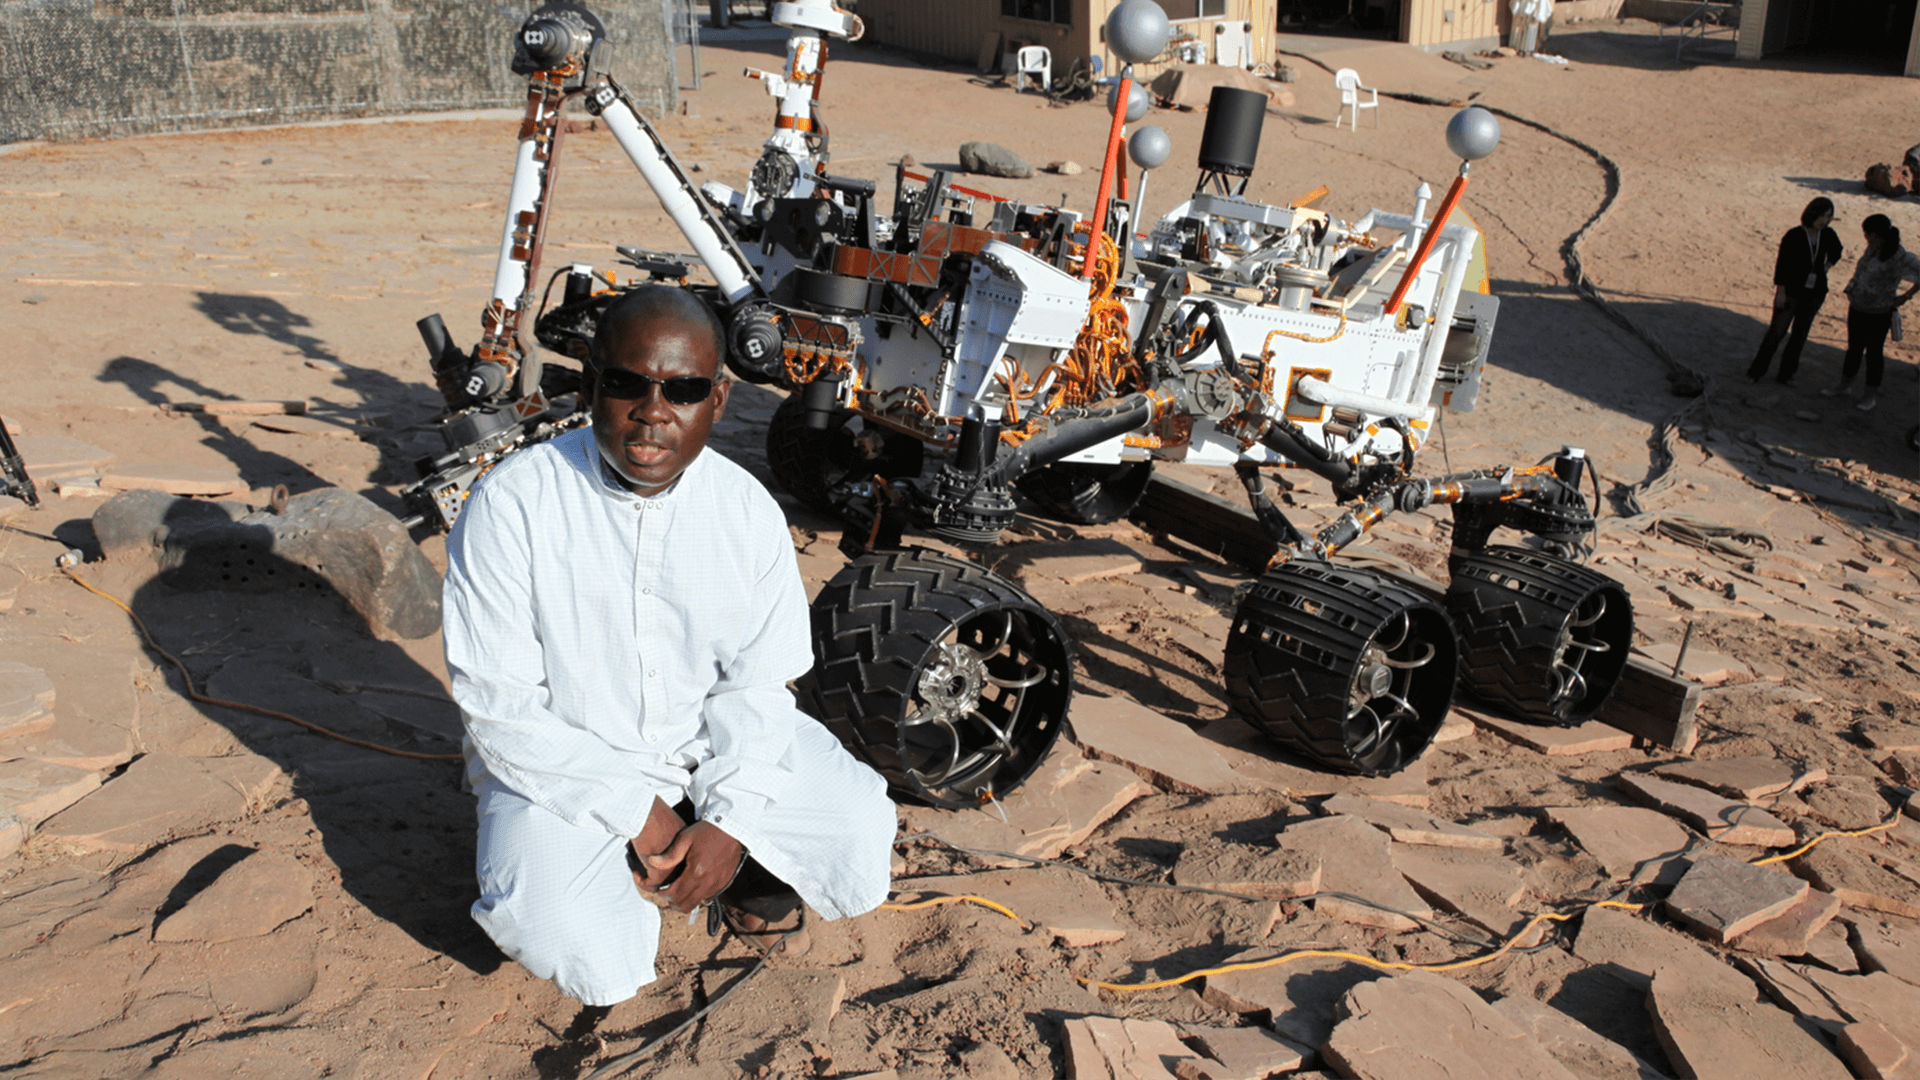 NASA engineer Ashitey Trebi-Ollennu, one of the robotic engineers in the Aspire programme, is shown at work with a prototype mars rover.